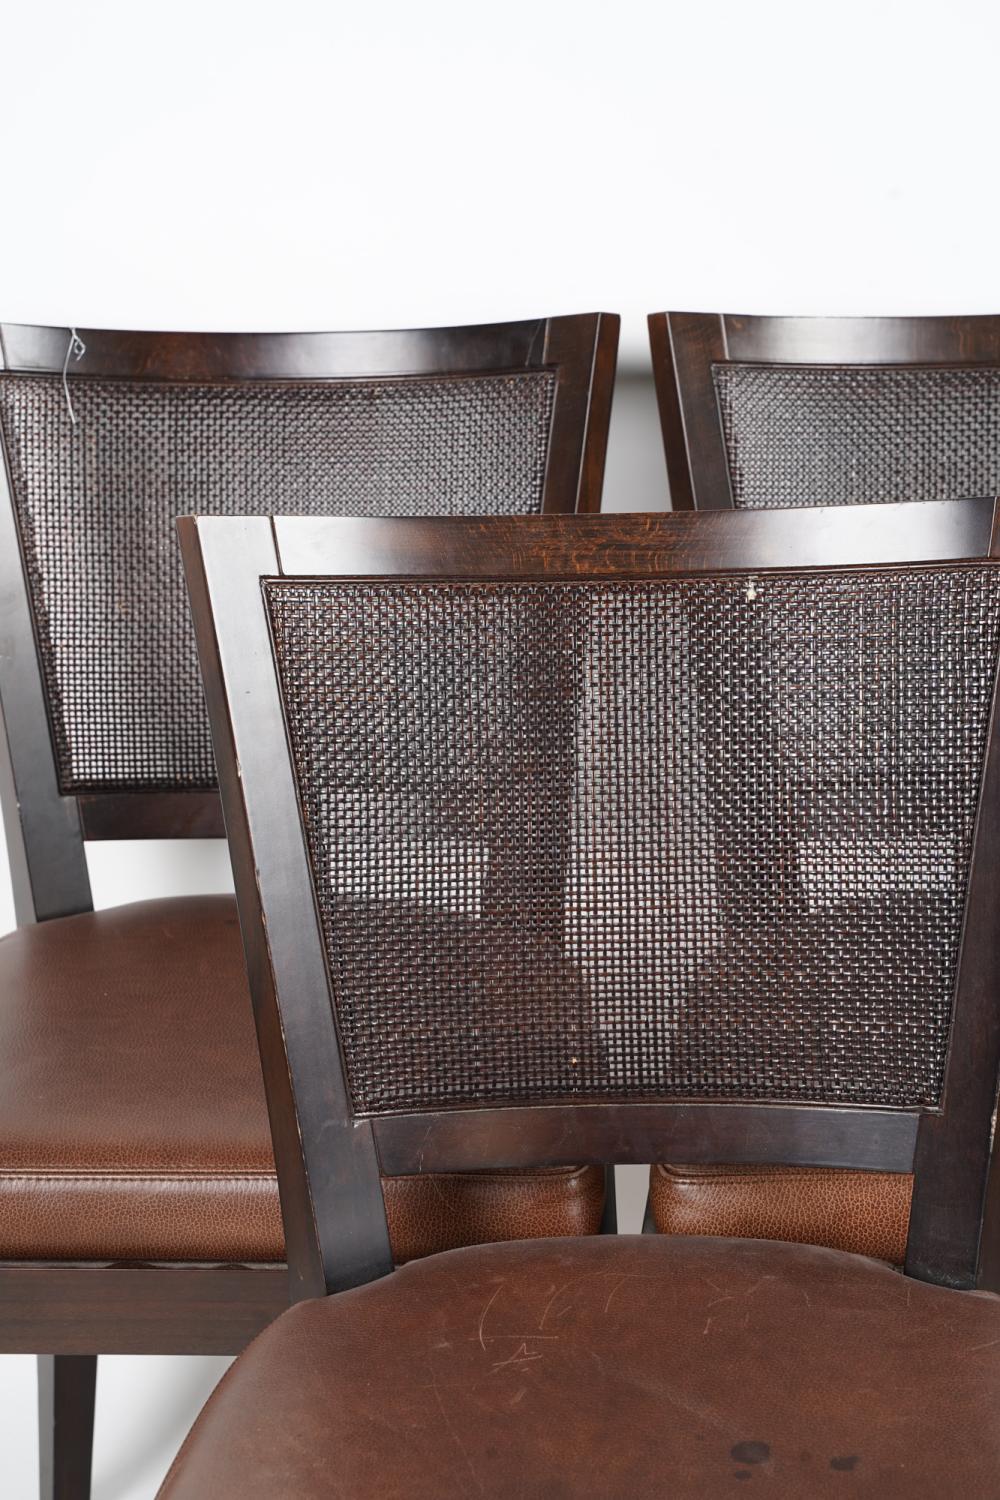 Modern Set Six Promemoria Caffe Caned Leather Dining Chairs Contemporary Italian C 2000 For Sale